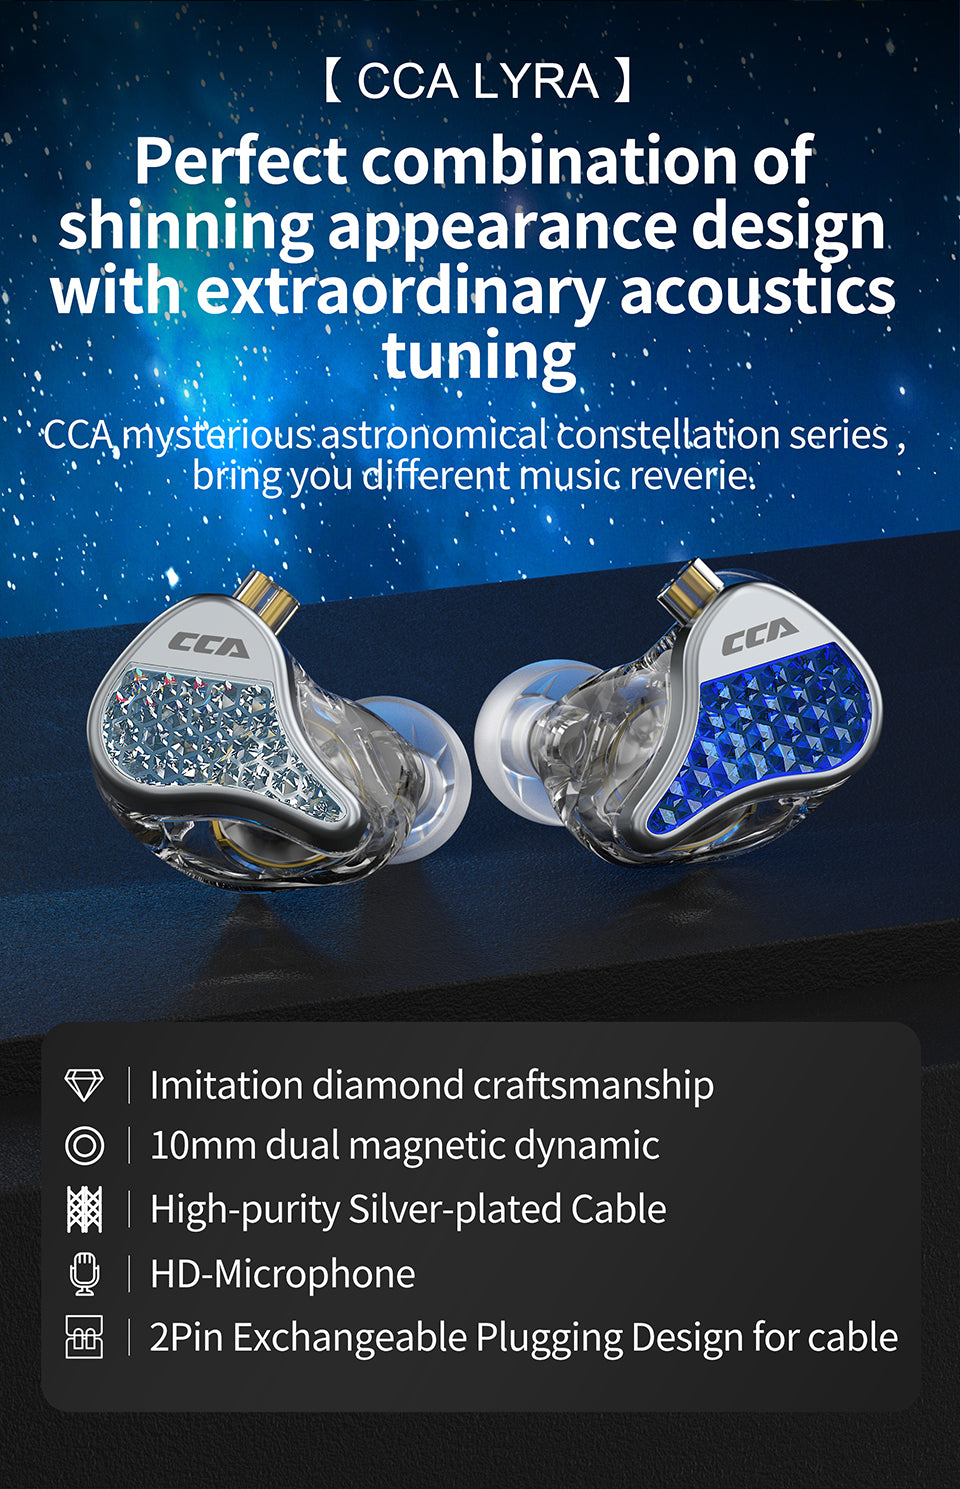 Perfect combination of shinning appearance design with extraordinary acoustics tuning   CCA mysterious astronomical constellation series , bring you different music reverie   Imitation diamond craftsmanship   Transparent bottom housing case    HD-Mic  10mm dual magnetic dynamic  High-purity Silver-plated Cable 2Pin Exchangeable Plugging Design for cable